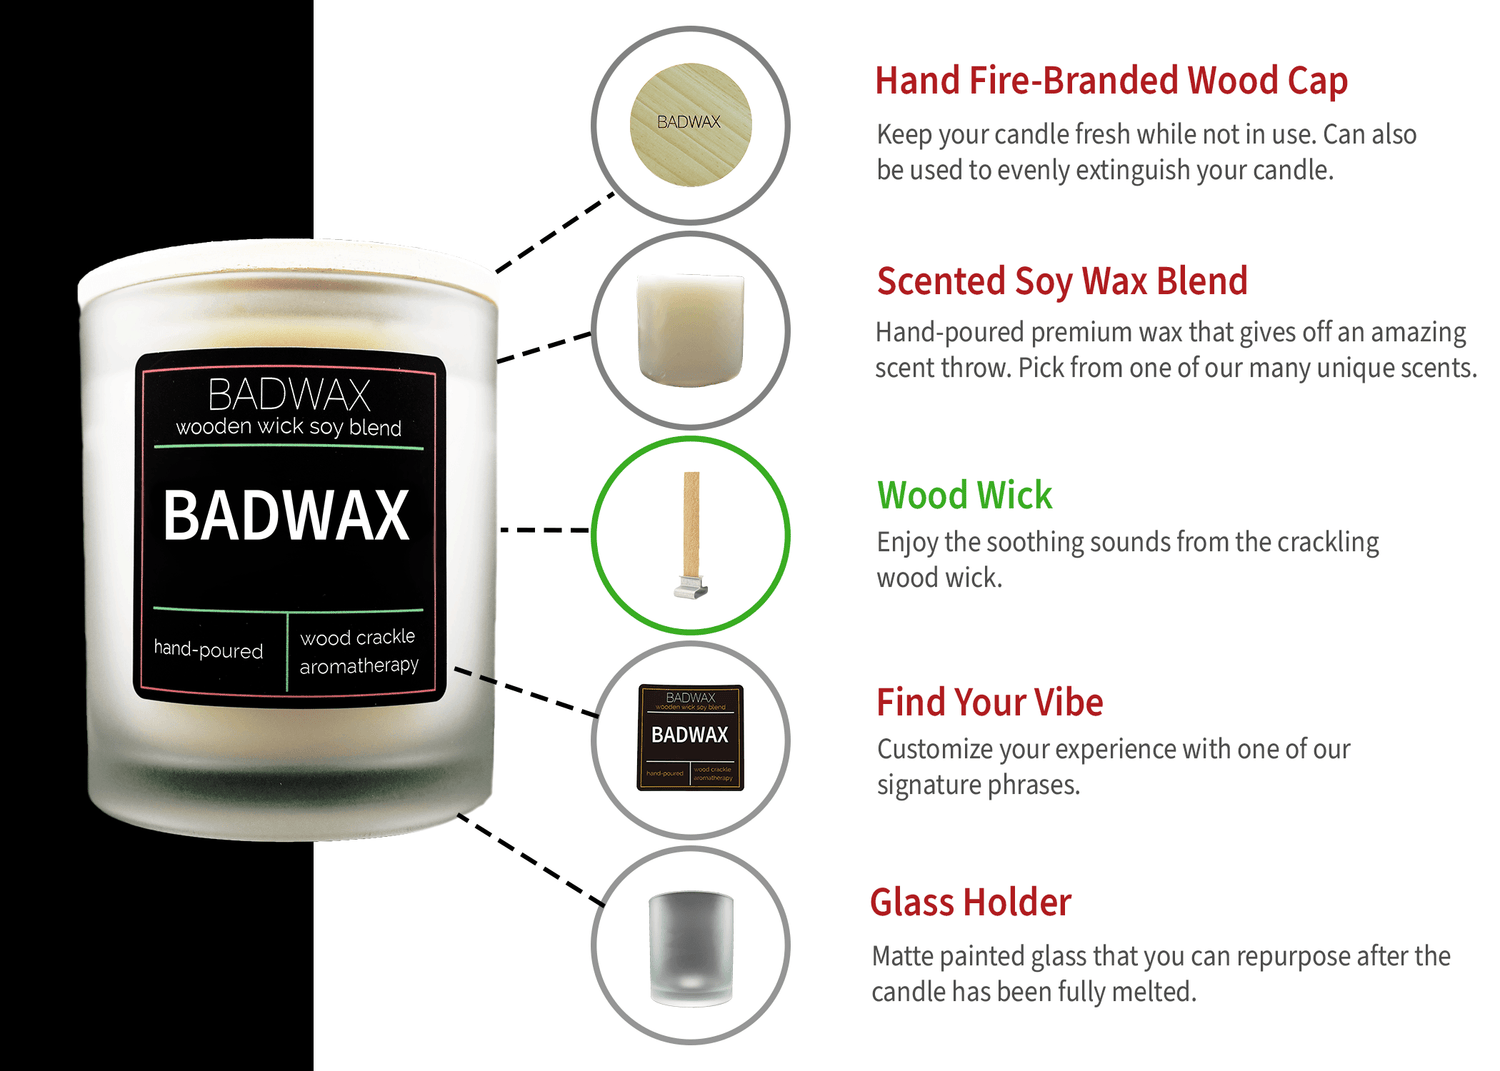 I Hid Your Present In My Vagina - Woodwick Candle - BADWAX